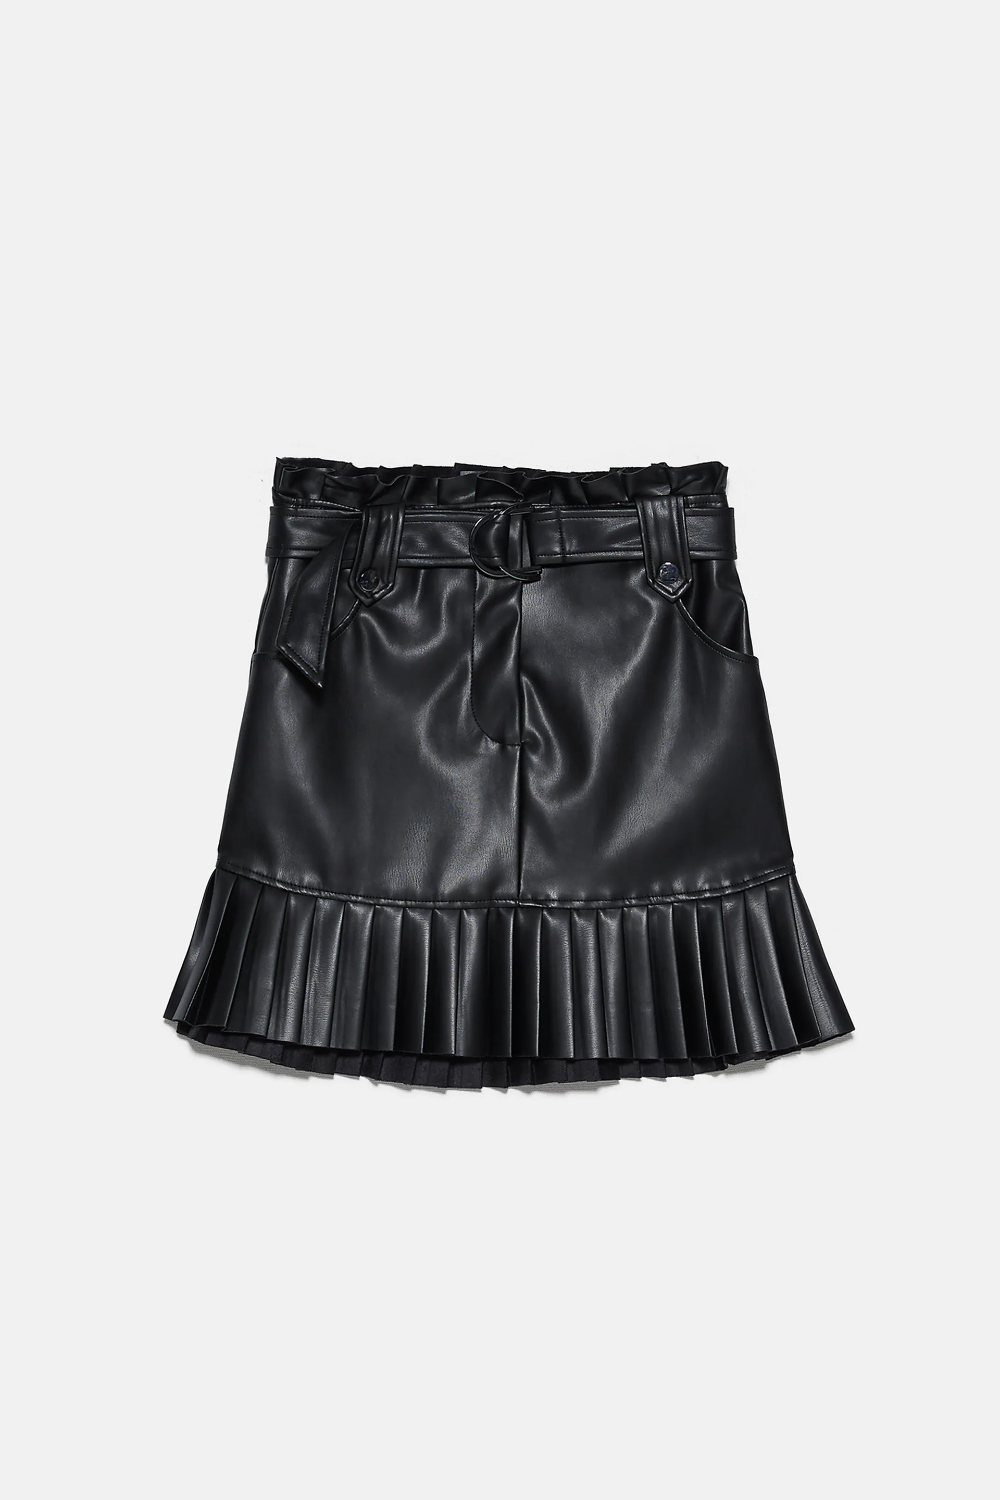 https://flyfiercefab.com/wp-content/uploads/2020/07/Zara-black-faux-leather-pleated-mini-skirt.png